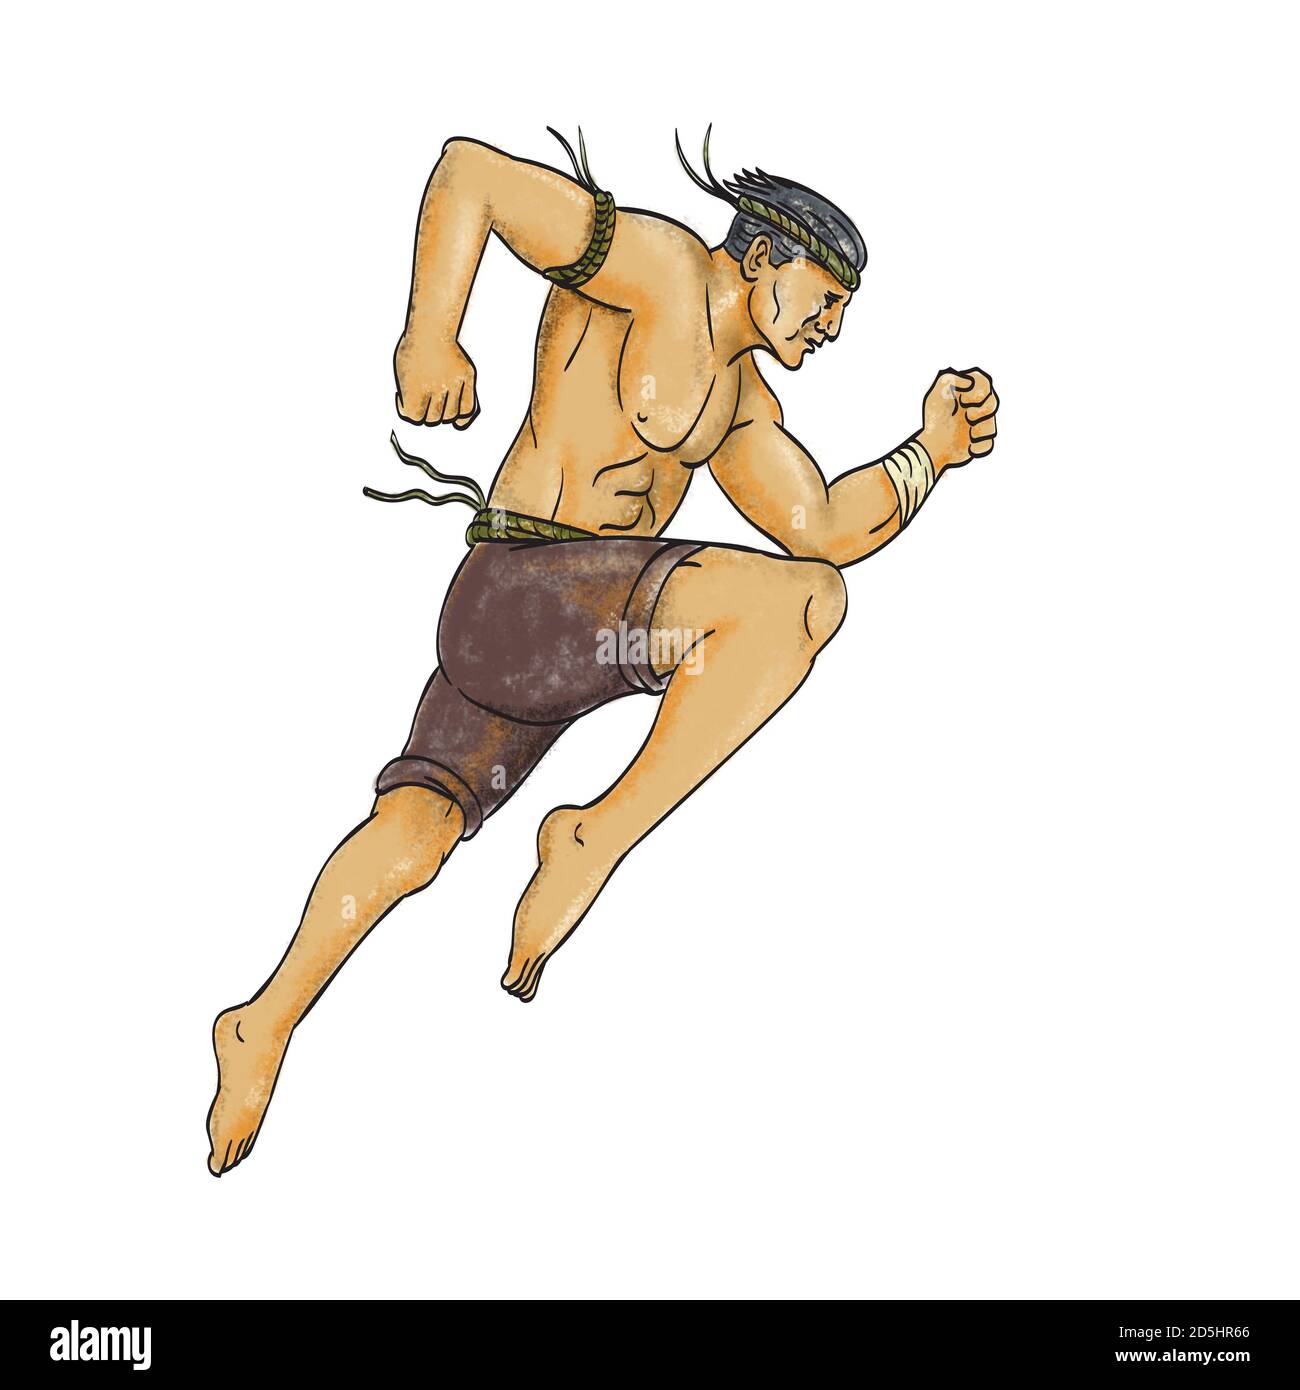 Tattoo style illustration of a Muay Thai or Thai boxing fighter, a combat sport of Thailand that uses stand-up striking, jumping striking with knee vi Stock Photo